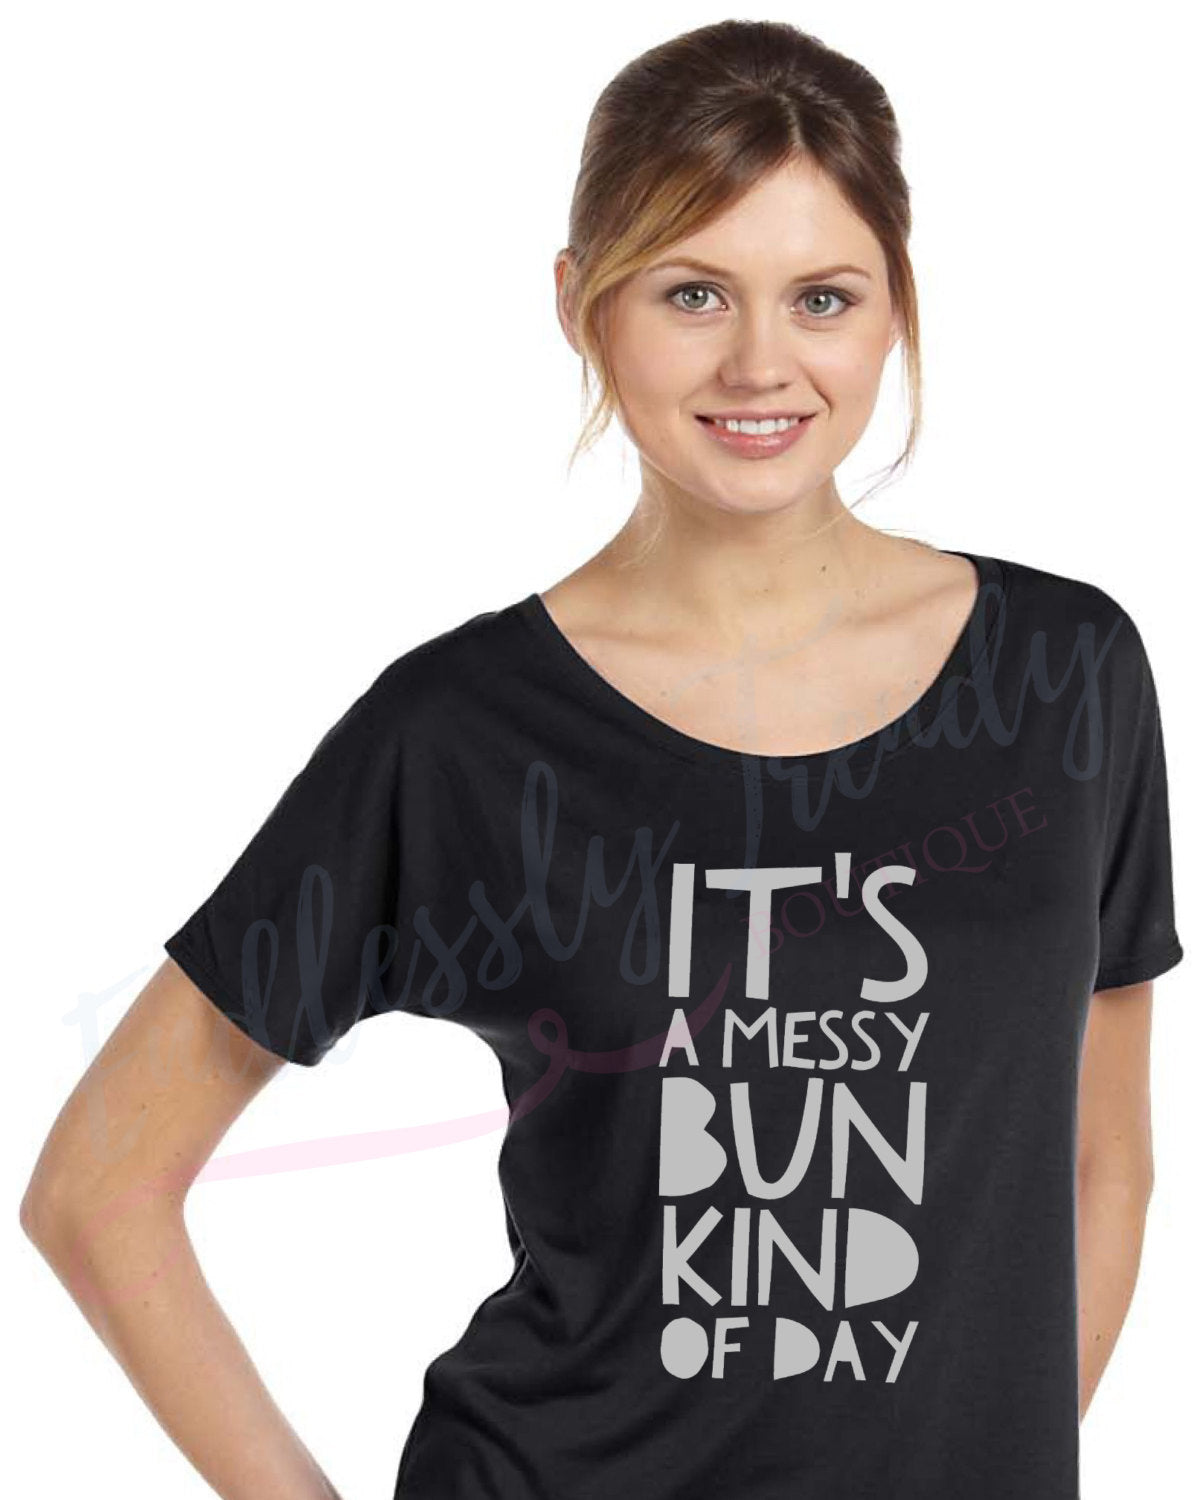 It's a Messy Bun Kind of Day Tee - - Endlessly Trendy Boutique